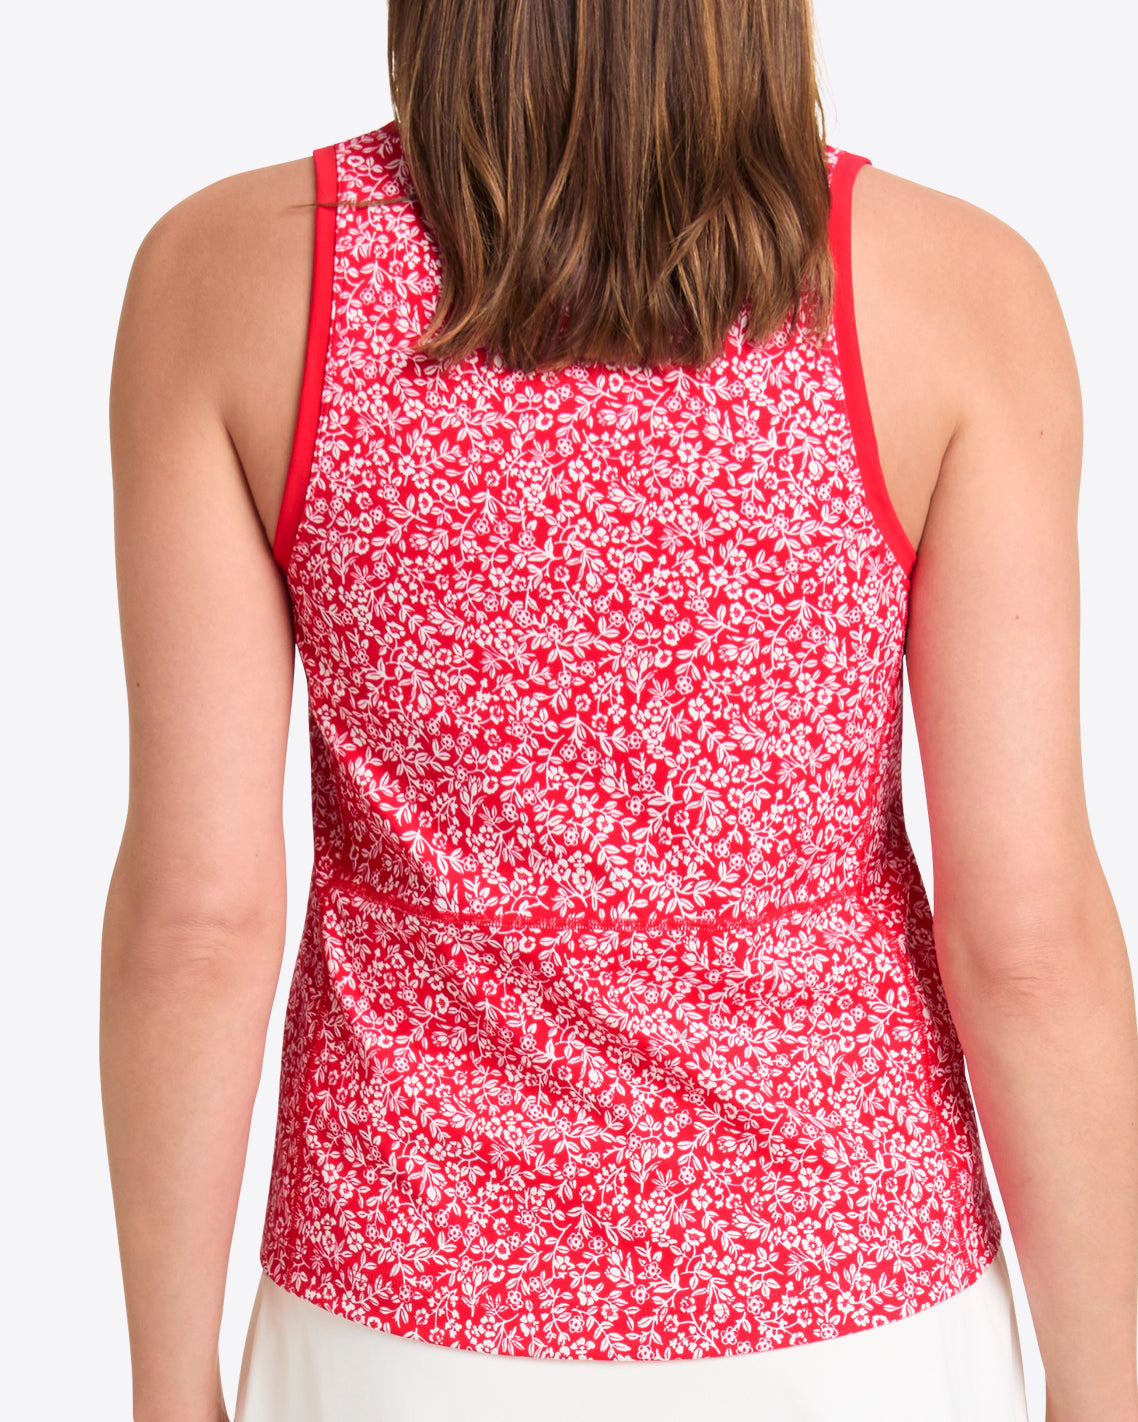 Tank in Whispy Floral